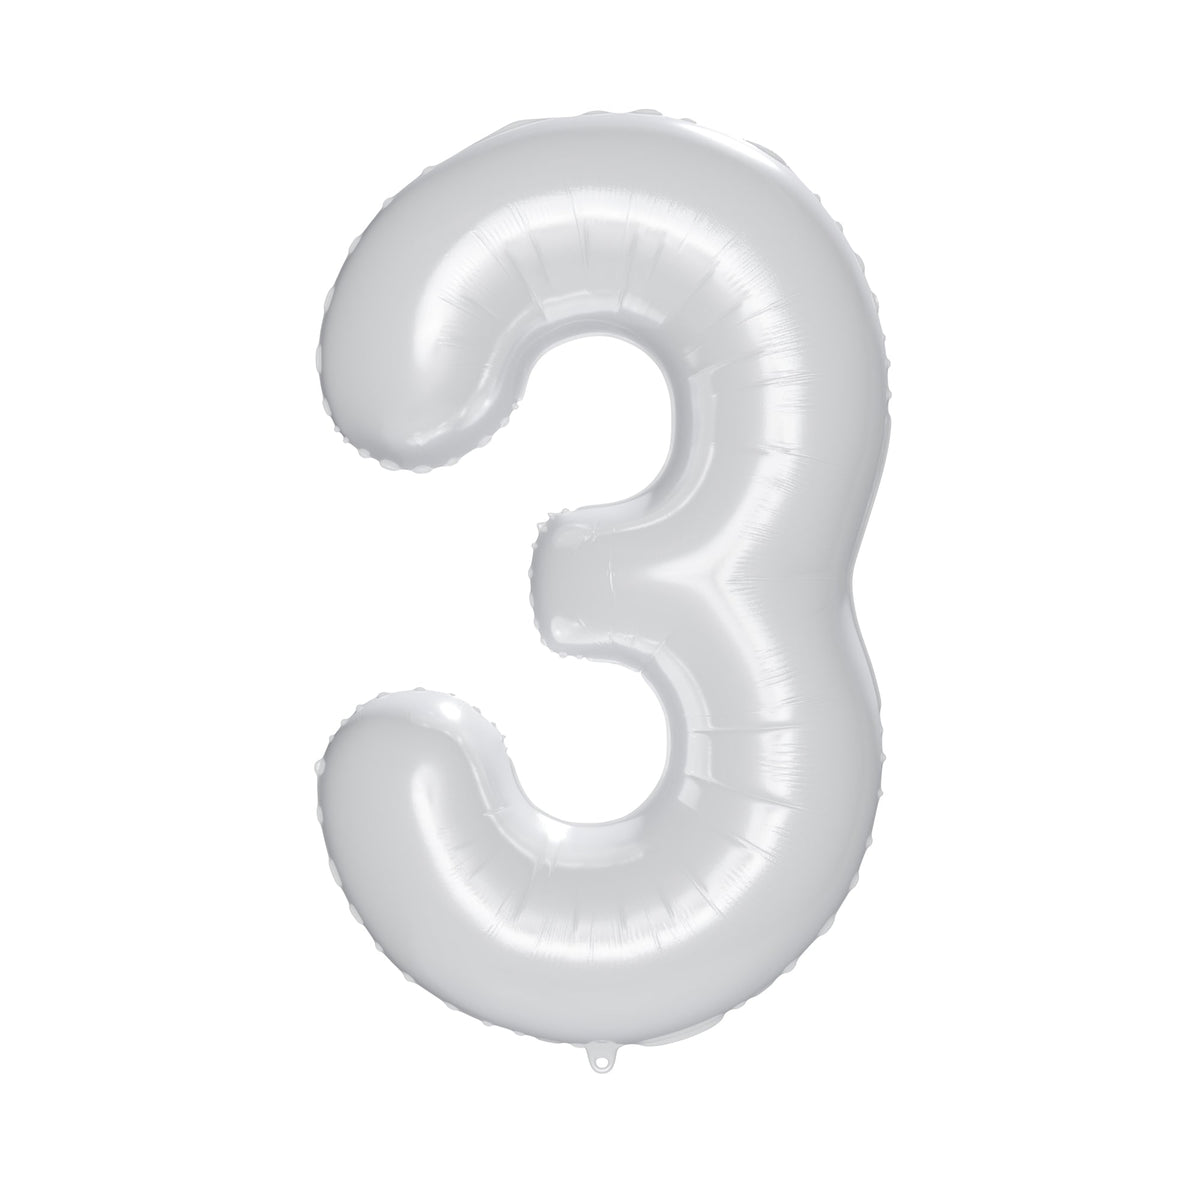 PARTYGRAM Balloons Frosty White Number 3 Foil Balloon, Matte Finish, 34 Inches, 1 Count 810077658178